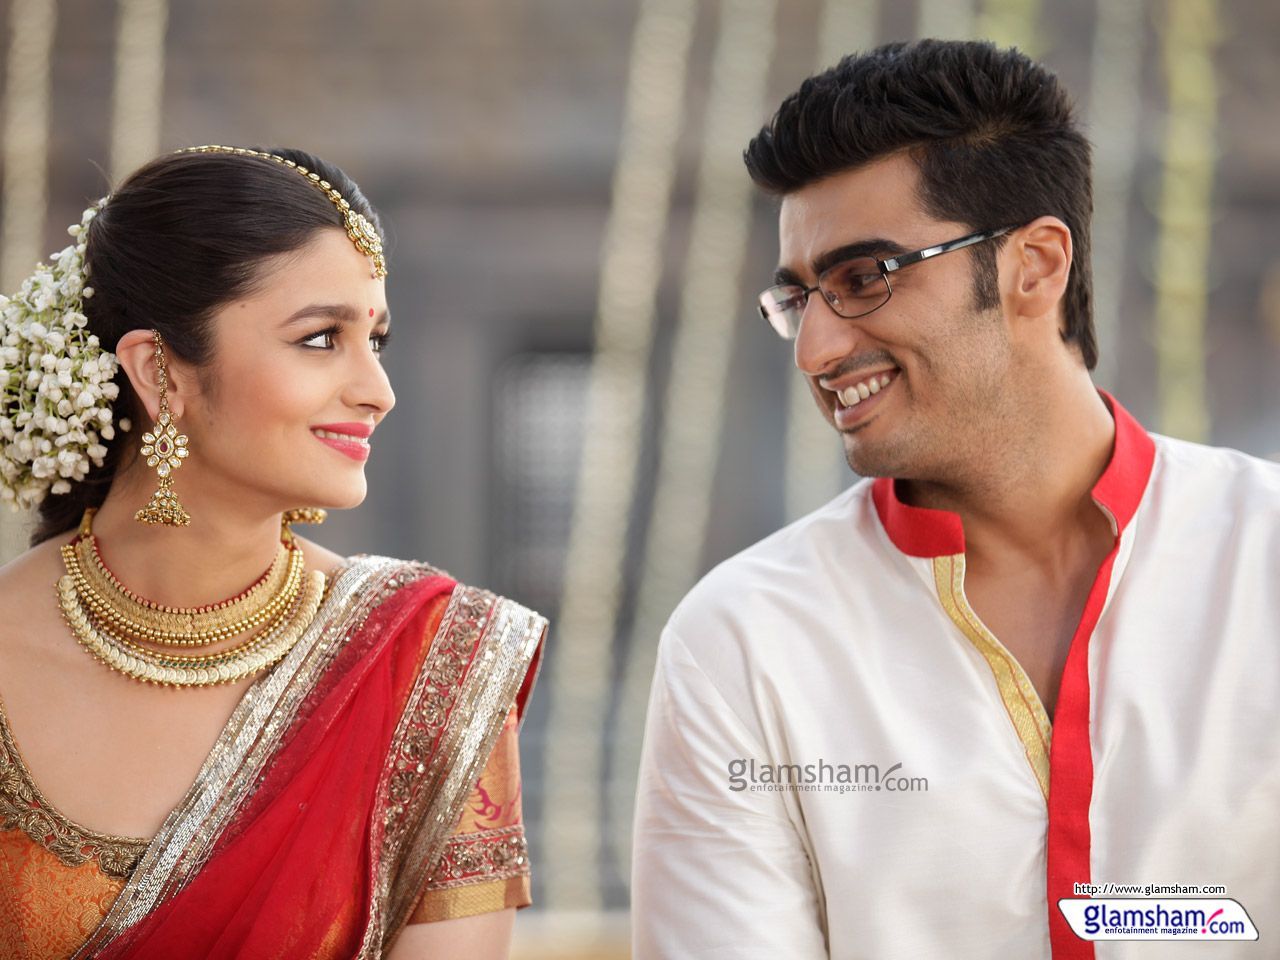 Fault In Our Stars. Bridal inspiration, Alia bhatt 2 states, Indian wedding